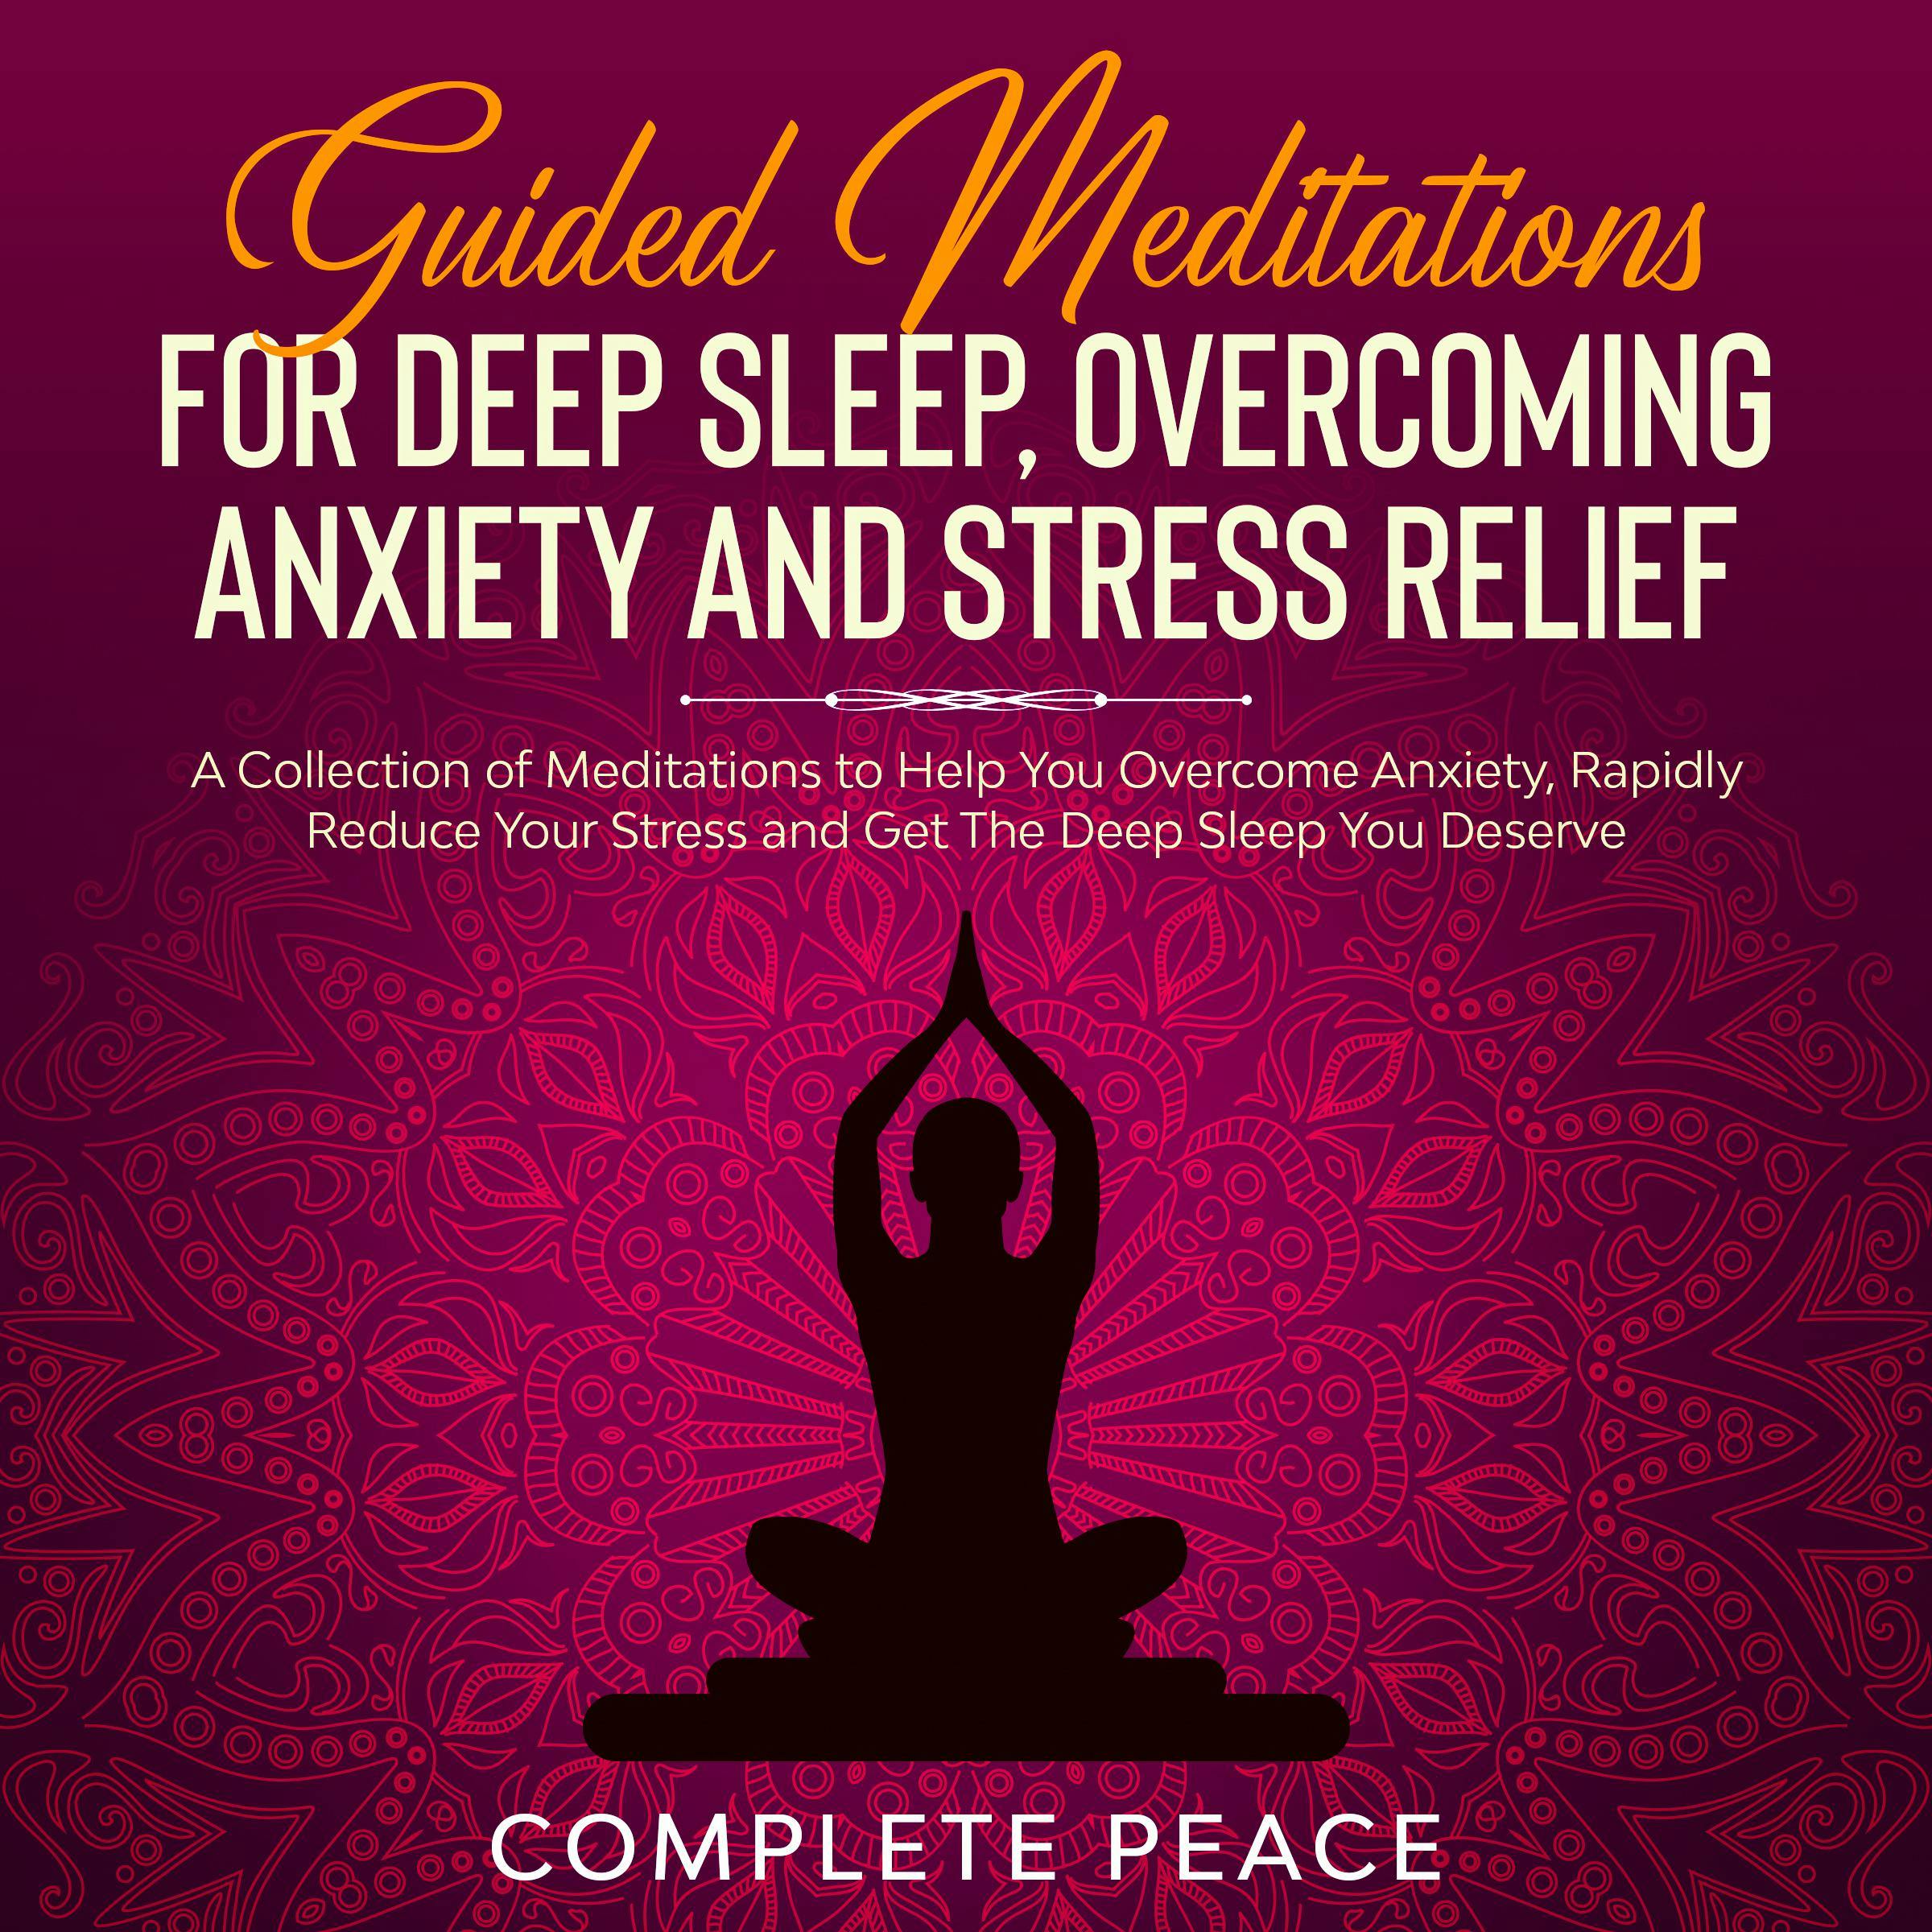 Guided Meditations For Deep Sleep, Overcoming Anxiety and Stress Relief: A Collection of Meditations To Help You Overcome Anxiety, Rapidly Reduce Stress and Get The Deep Sleep You Deserve - COMPLETE PEACE